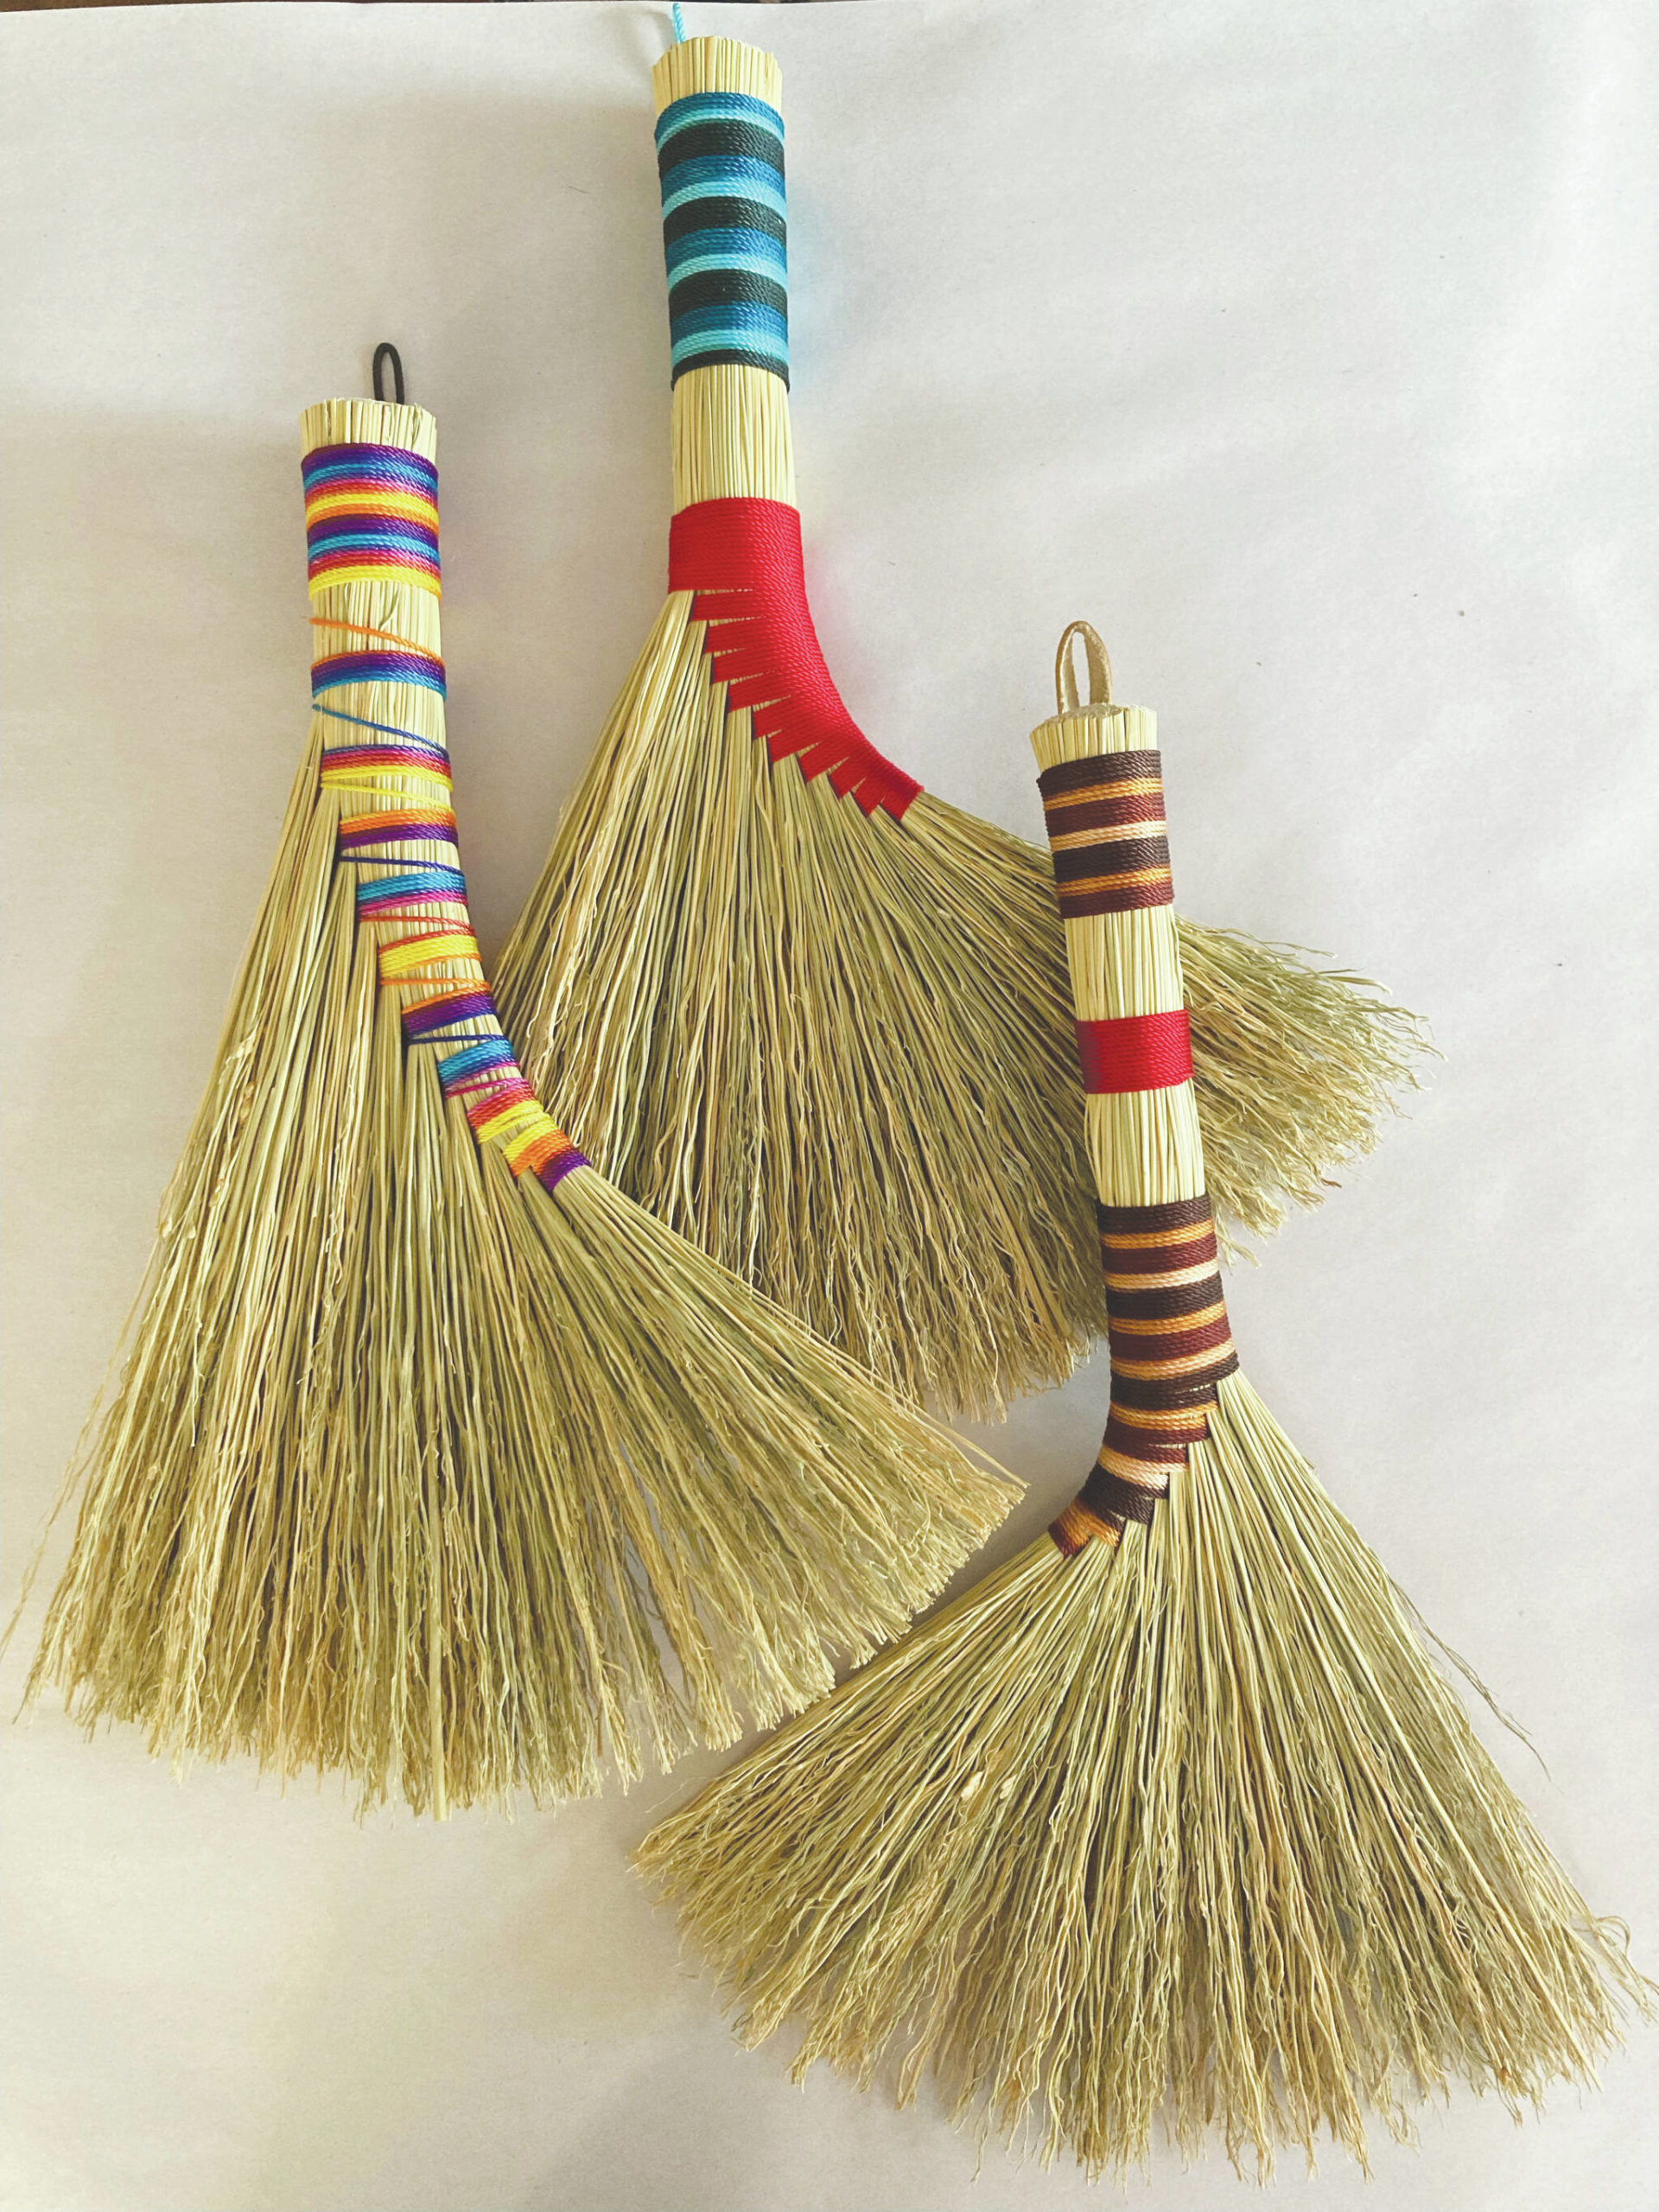 Handmade turkey wing and turkey tail style brooms made by Willow Q Jones in her home studio, January 2023. (Photo provided by Willow Q Jones/courtesy)